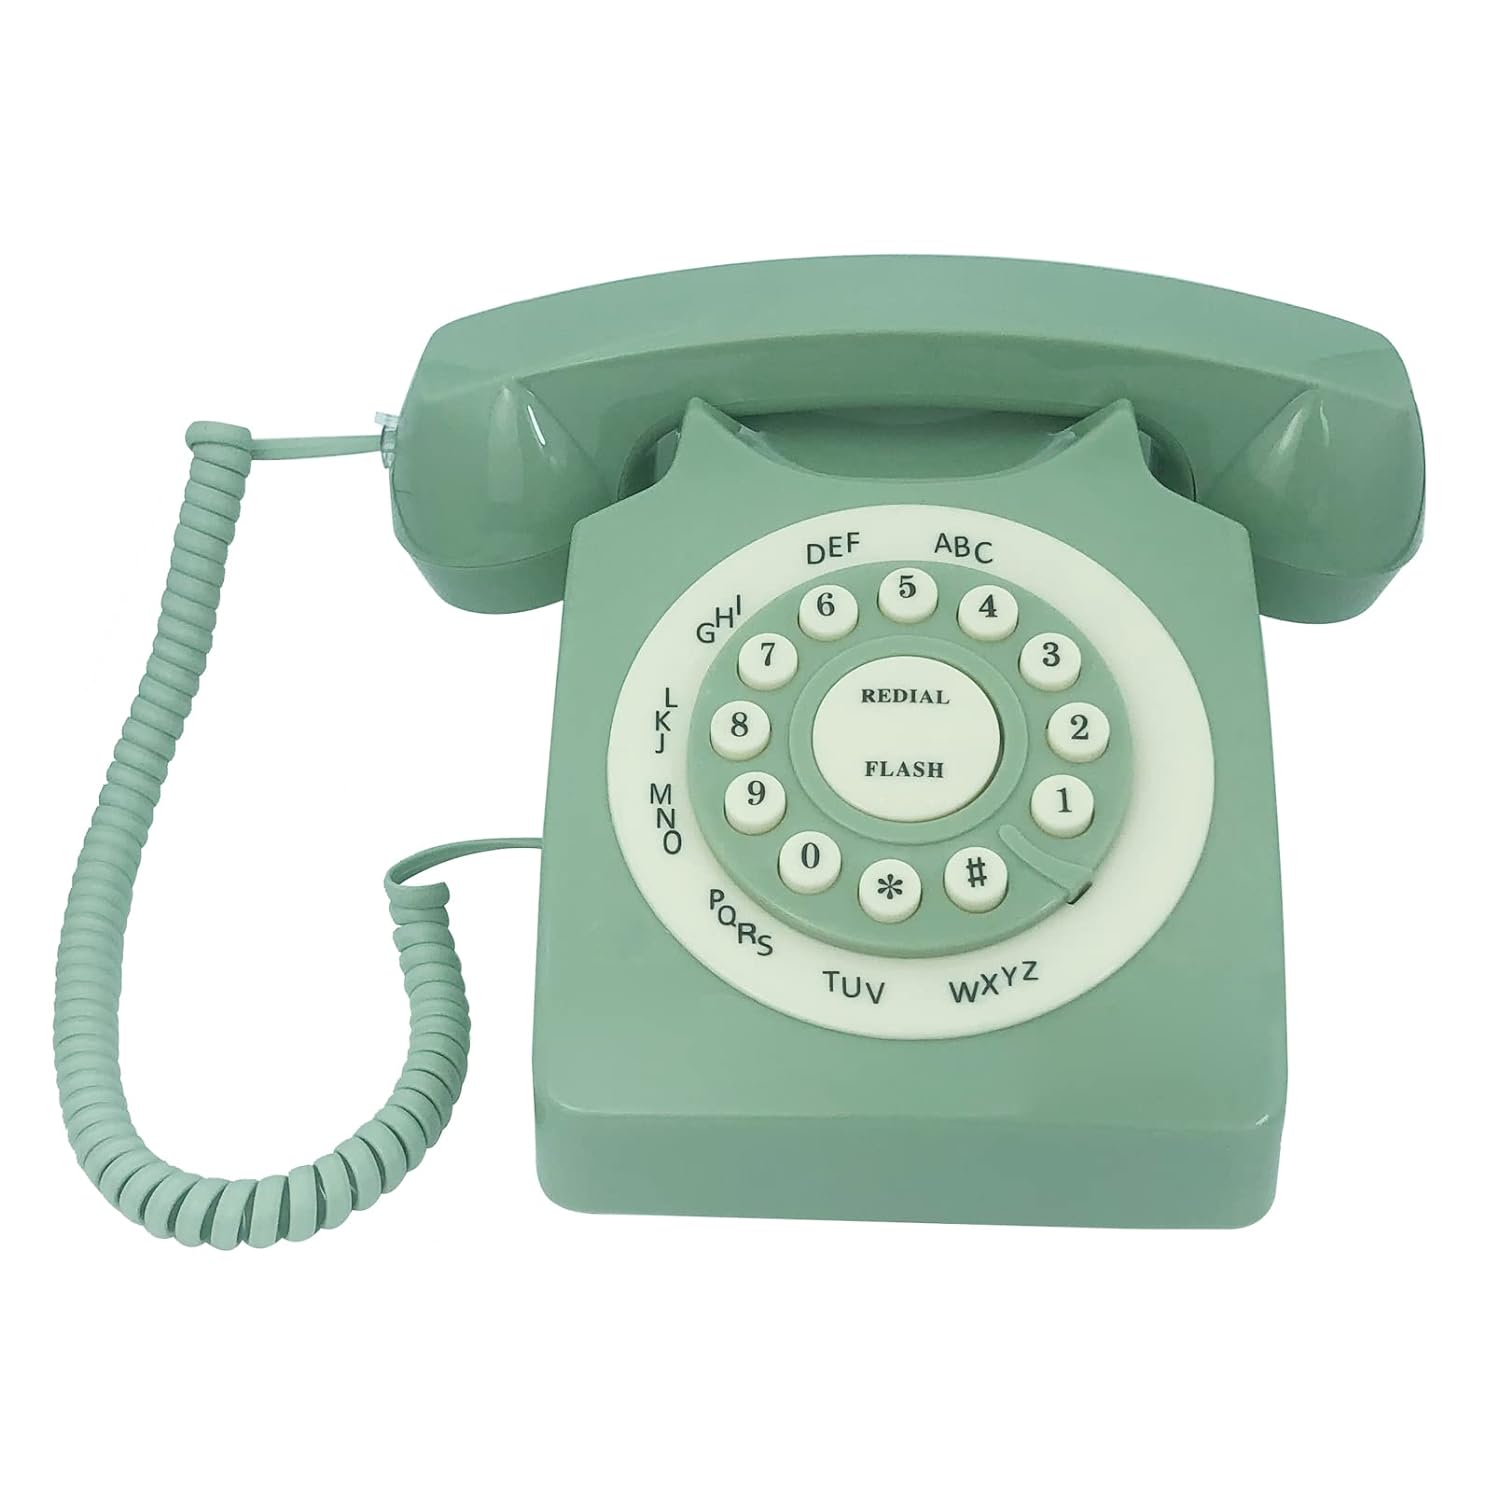 Great Choice Products Retro Corded Landline Phone, Classic Vintage Old Fashion Telephone For Home & Office, Wired Home Phone Gift For Seniors (Gree…